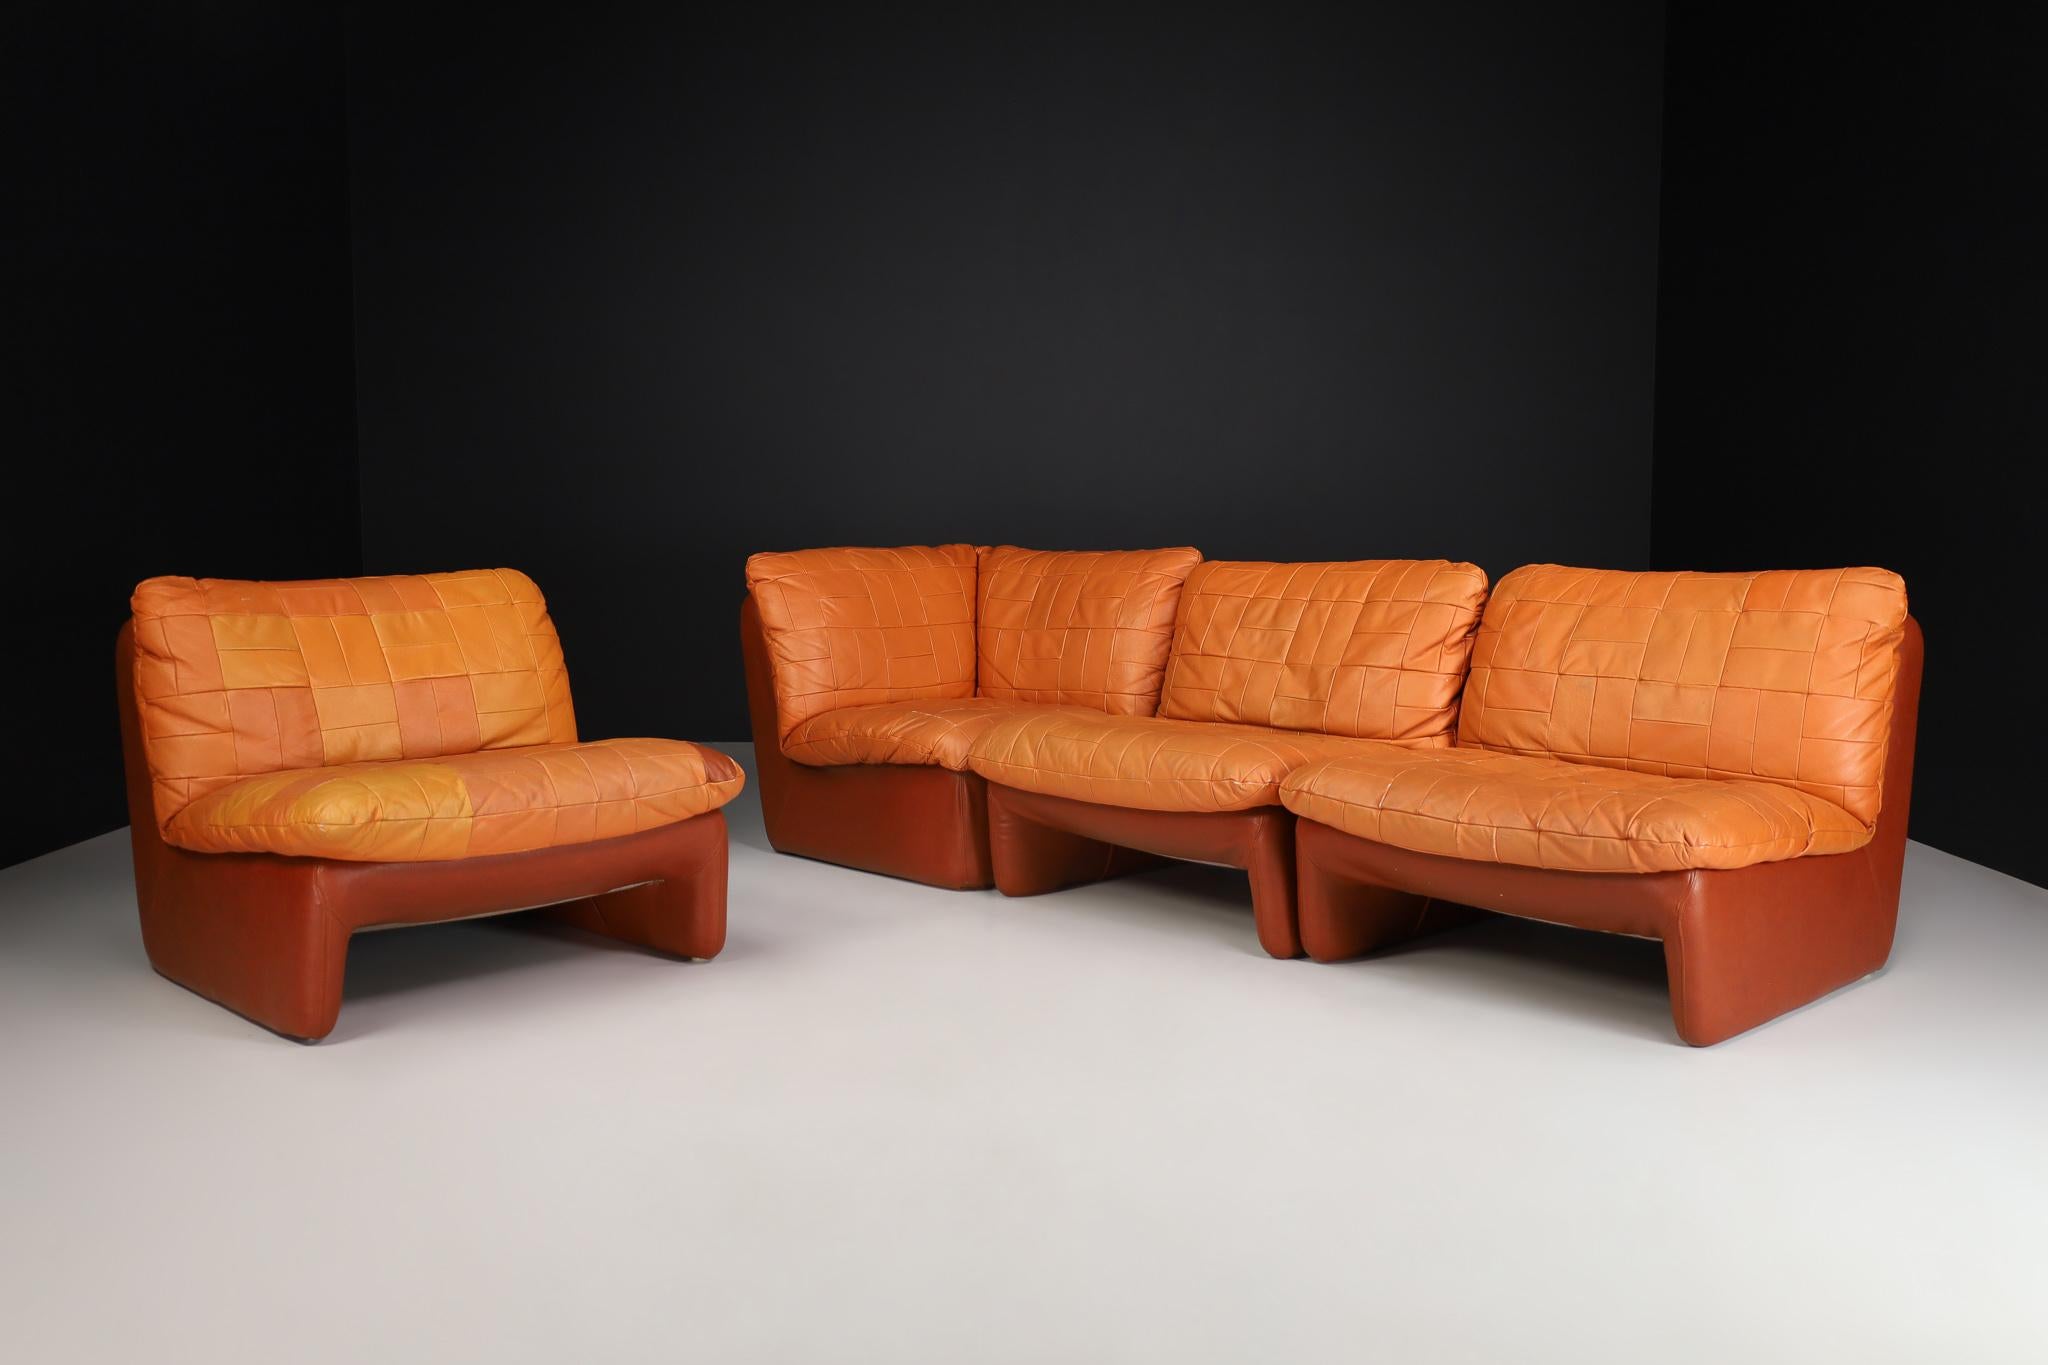 Mid-Century Modern leather Patchwork Lounge sofa/living room Set/4, Switzerland 1970s

Mid-century modern leather patchwork lounge Sofa/living room set manufactured and designed in Switzerland 1970s. It is in beautiful vintage condition, with a